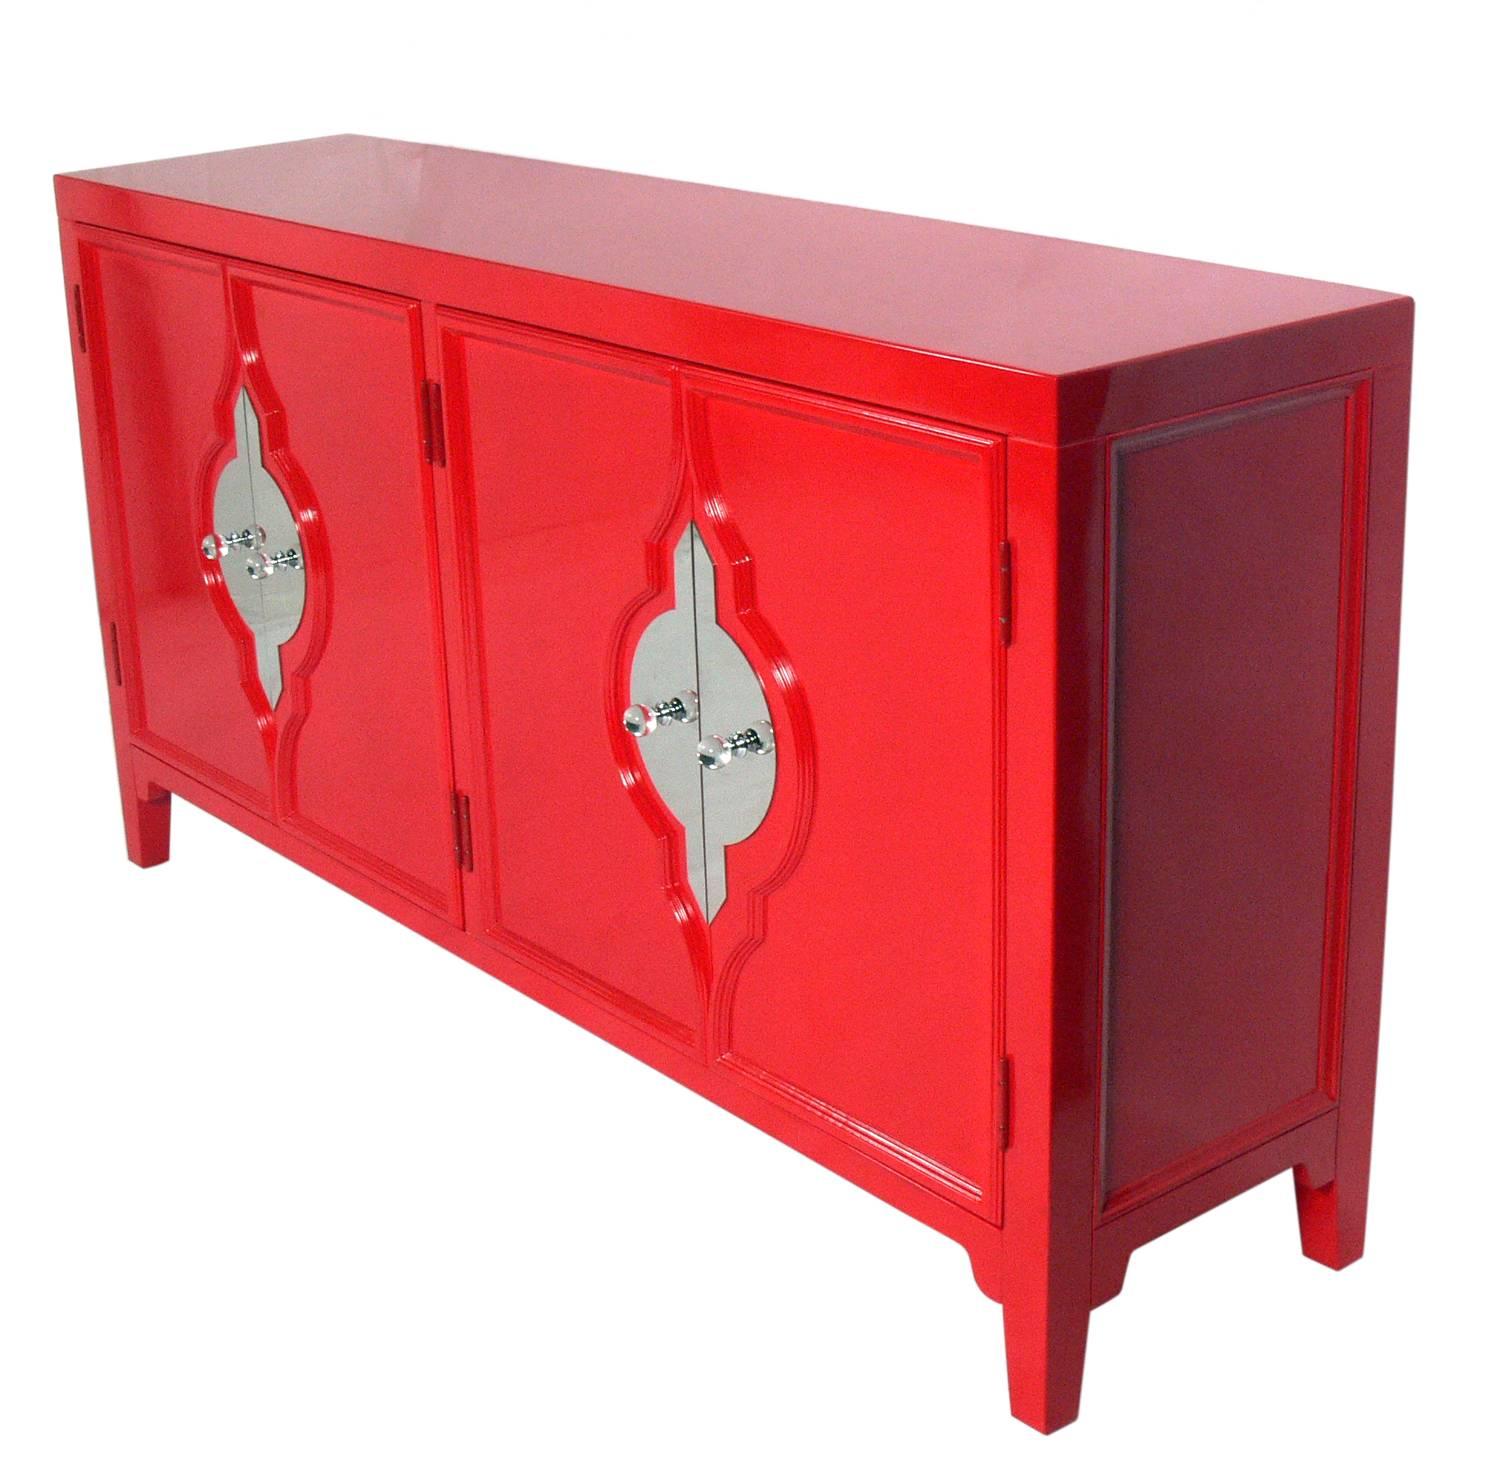 Vibrant red lacquer credenza, American, circa 2000s. This piece is a versatile size and can be used as a credenza, server, bar, or media cabinet in a living area, or as a chest or dresser in a bedroom. The double doors on either side open to reveal